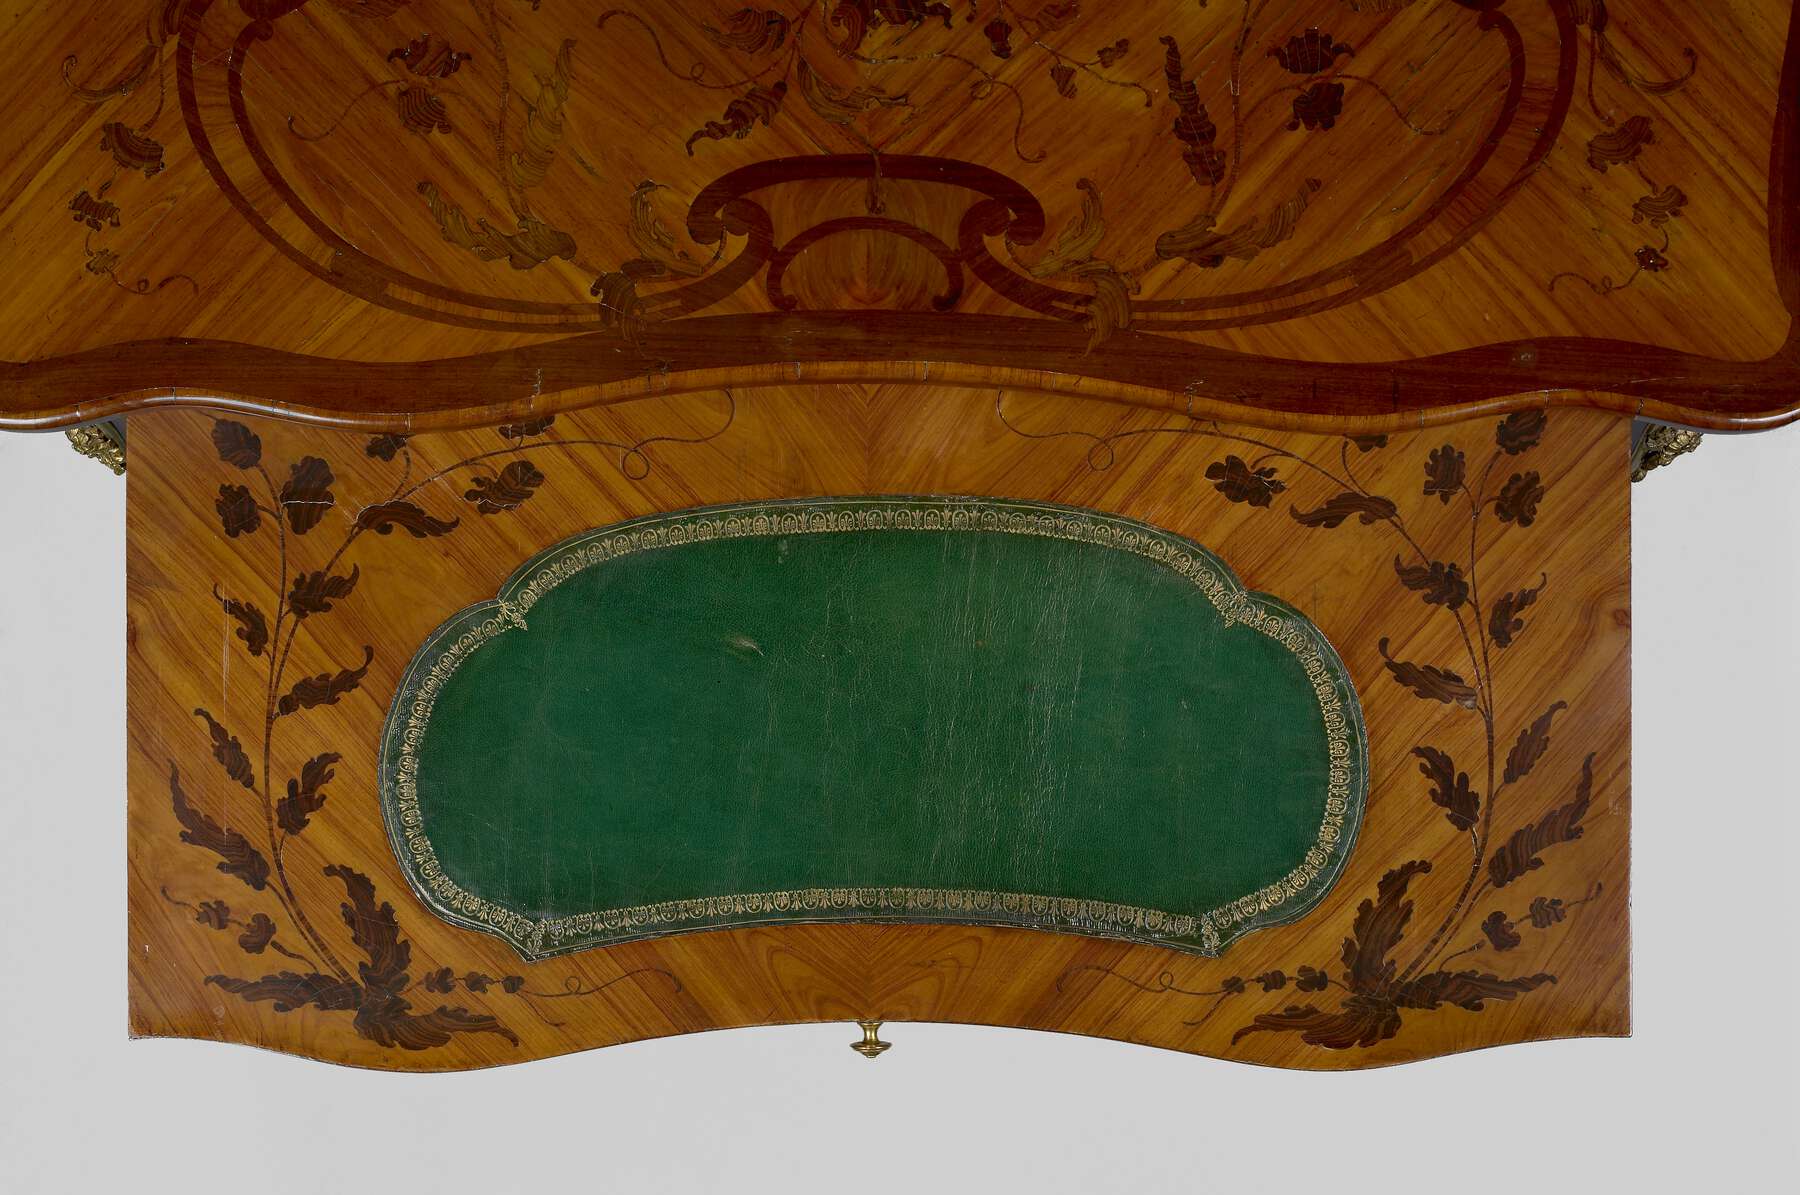 bird’s-eye view of the frontal slide, highlighting the marquetry of foliate designs that frames the oval-shaped green leather